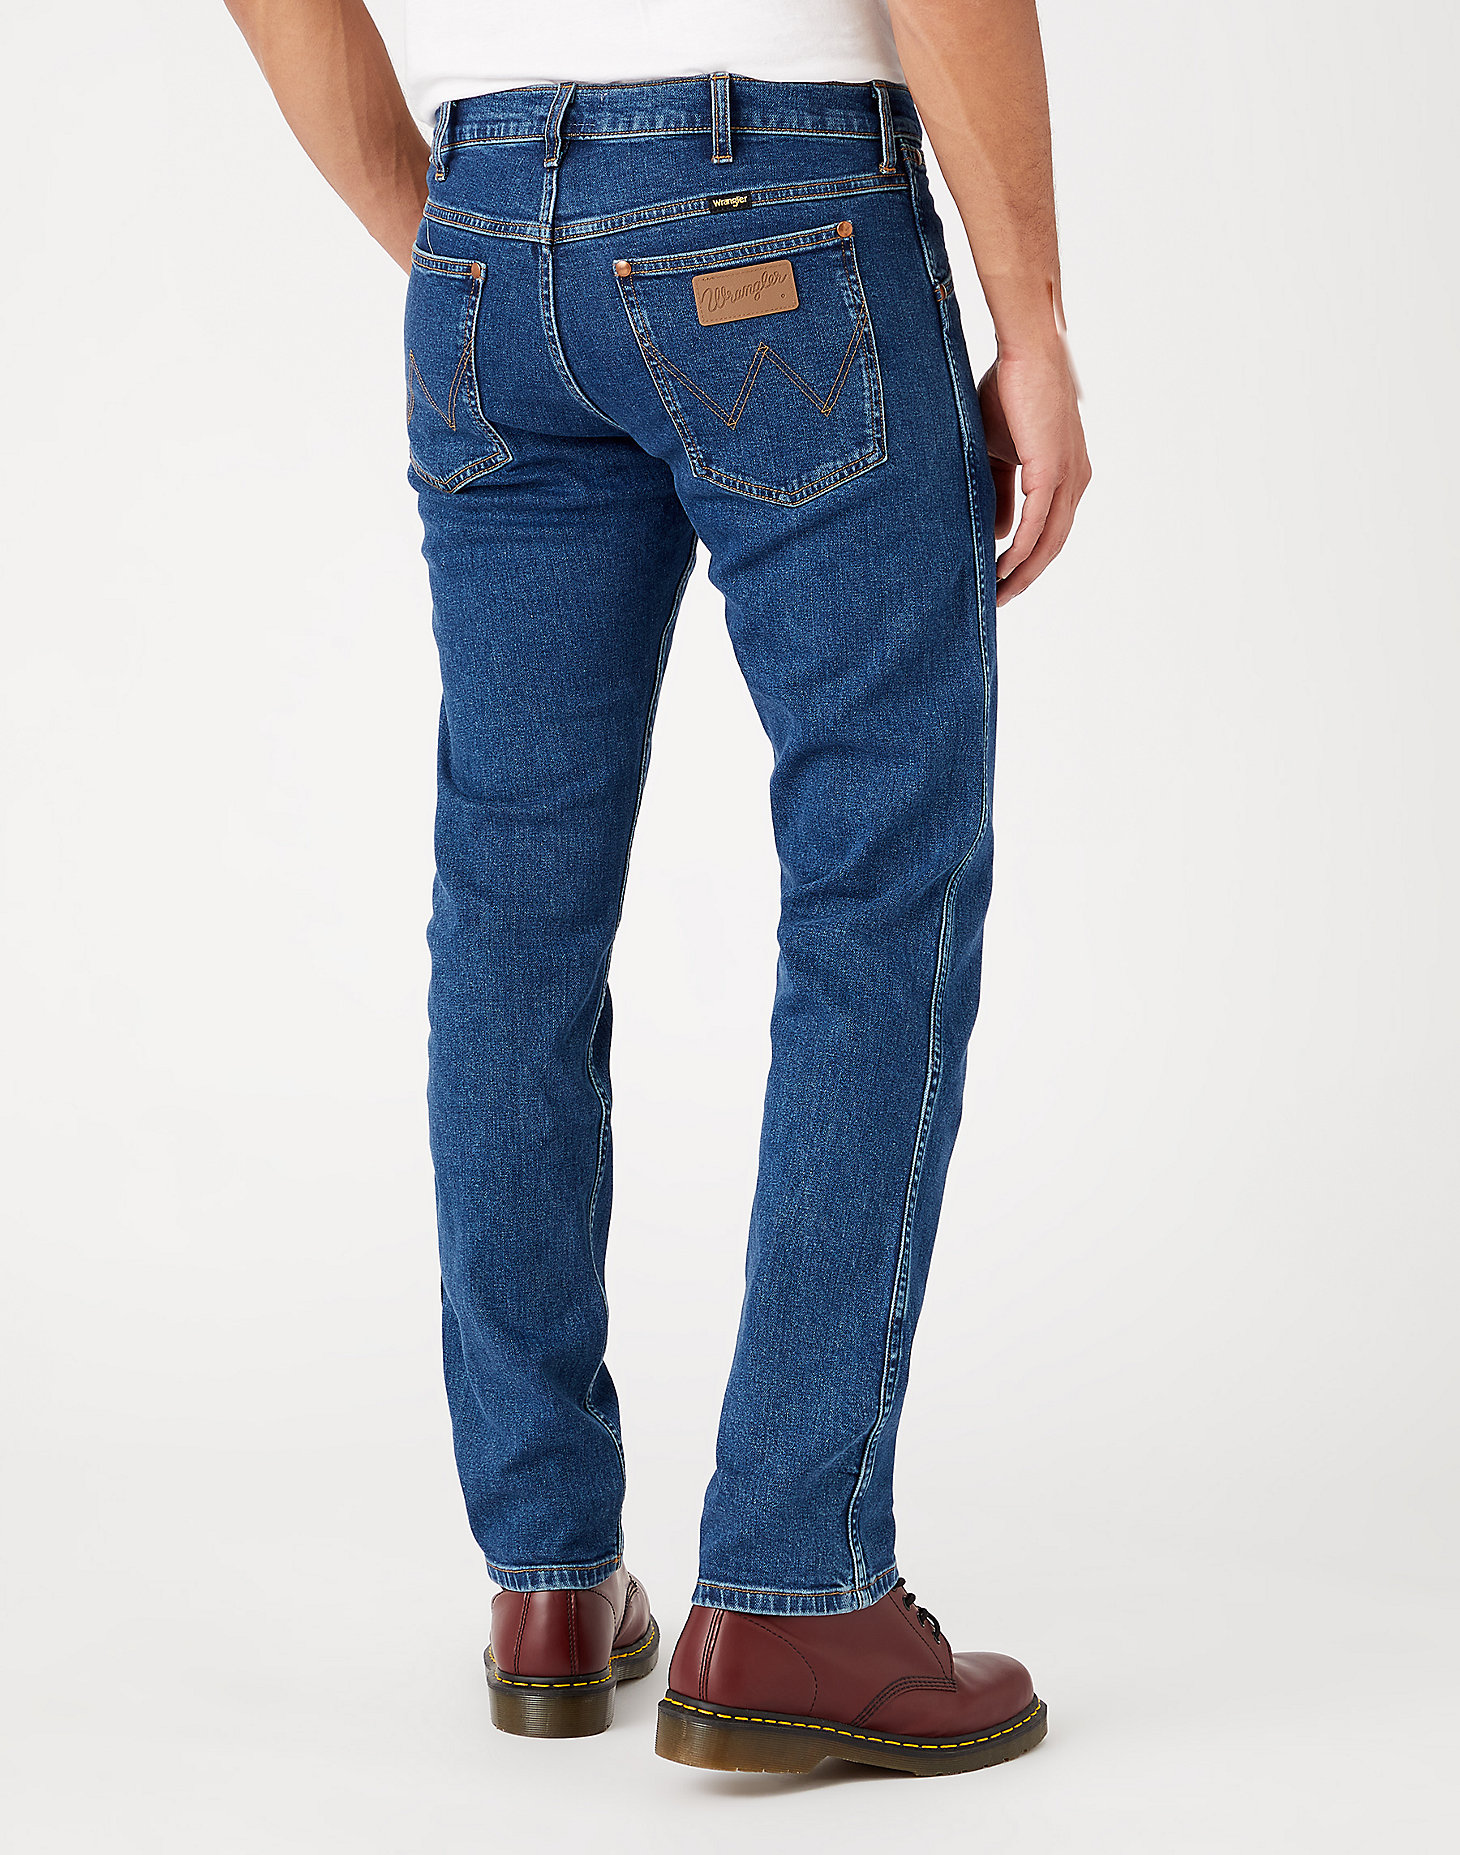 Icons 11MWZ Western Slim Jeans in 6 Months alternative view 2